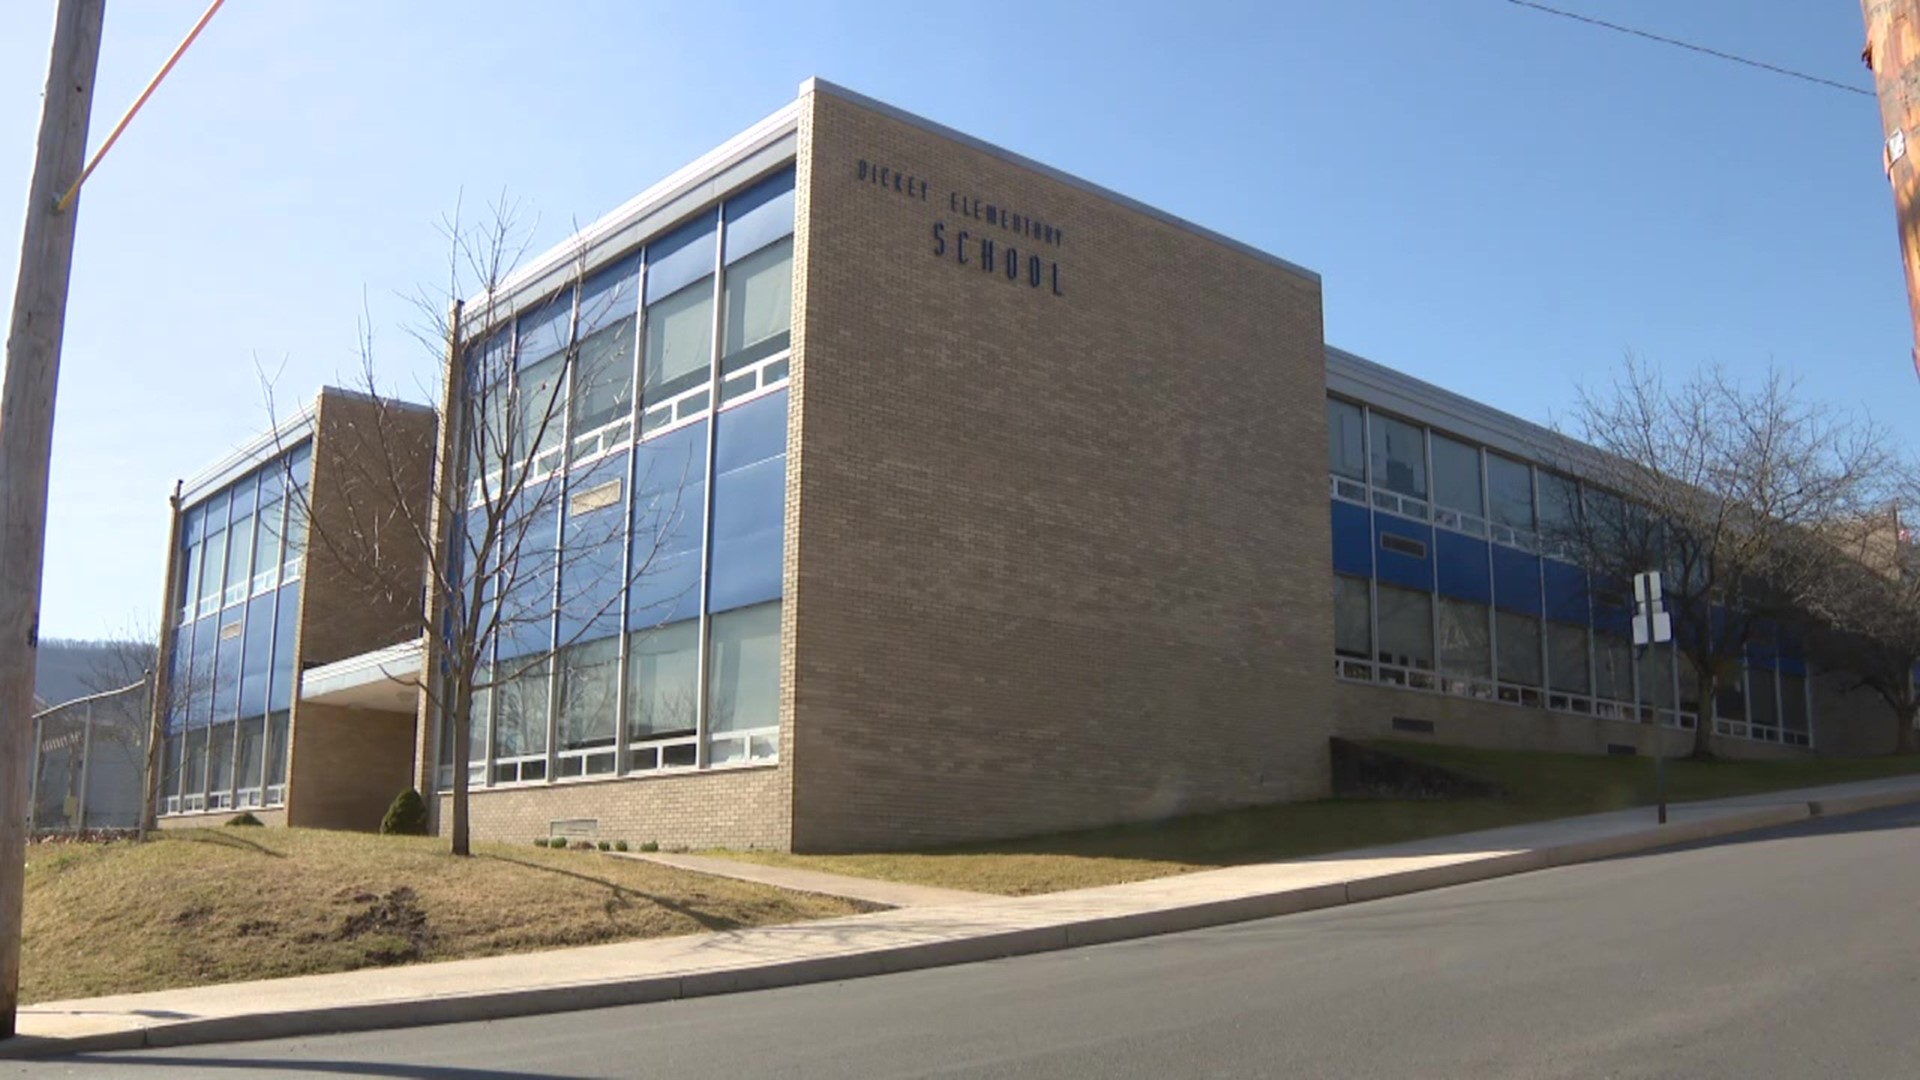 Keystone Central School District may have to close one of the oldest schools in Clinton County. Dickey Elementary in Lock Haven may be shutting its doors for good.